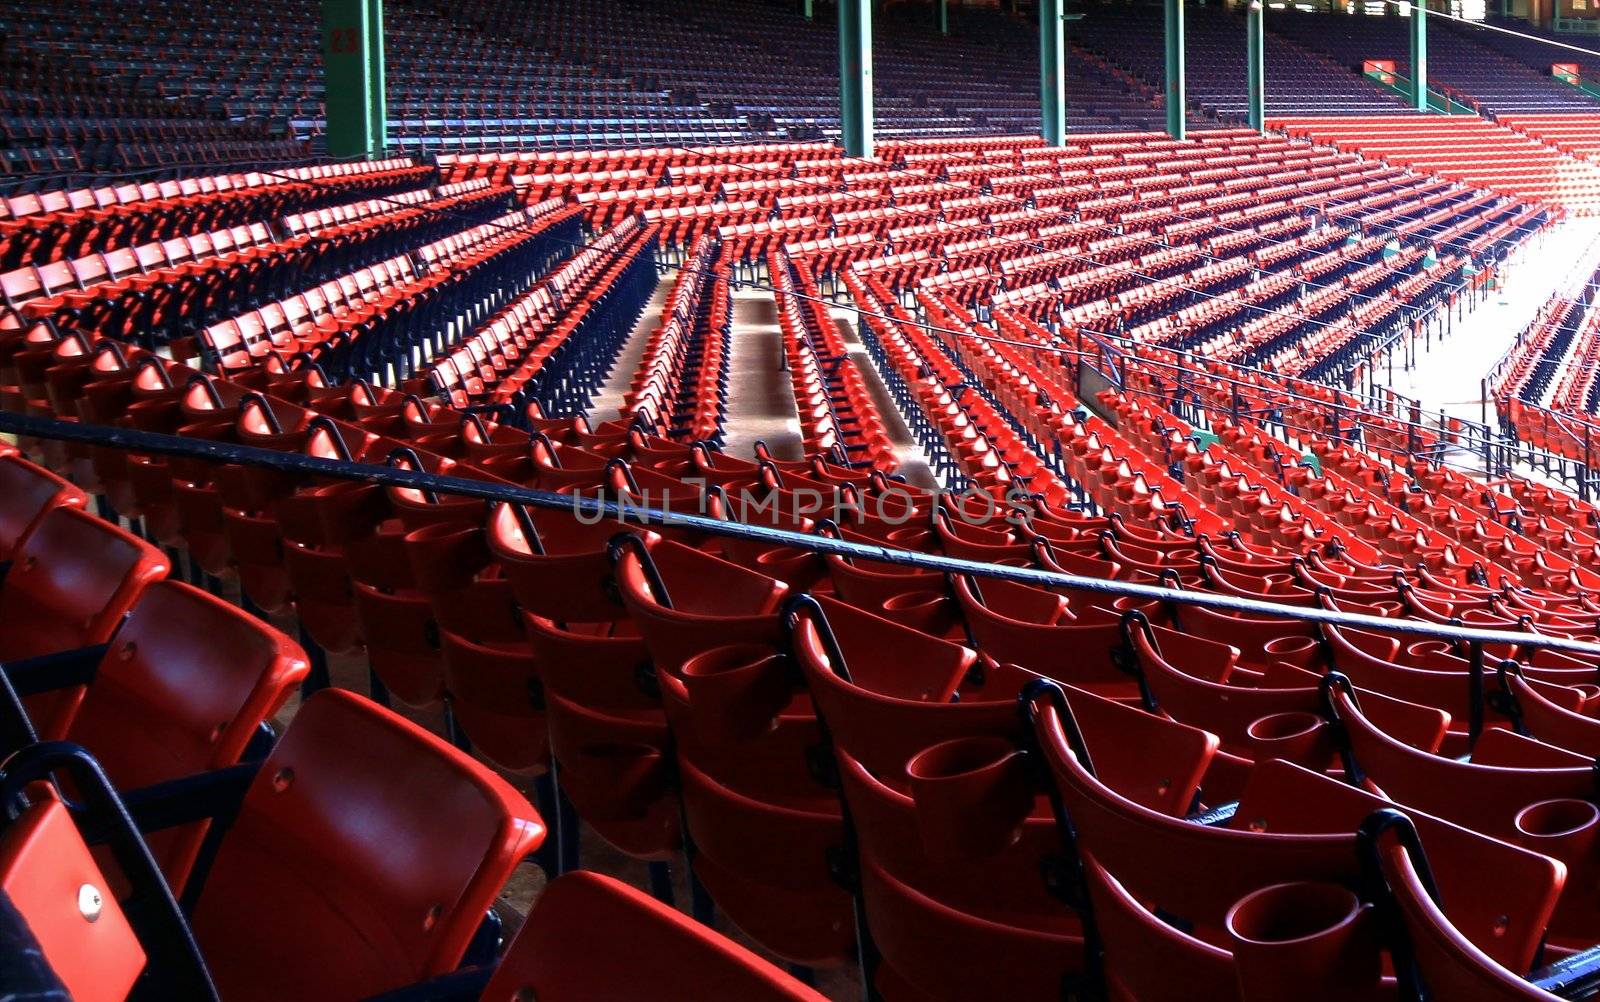 Section of red seats at baseball stadium